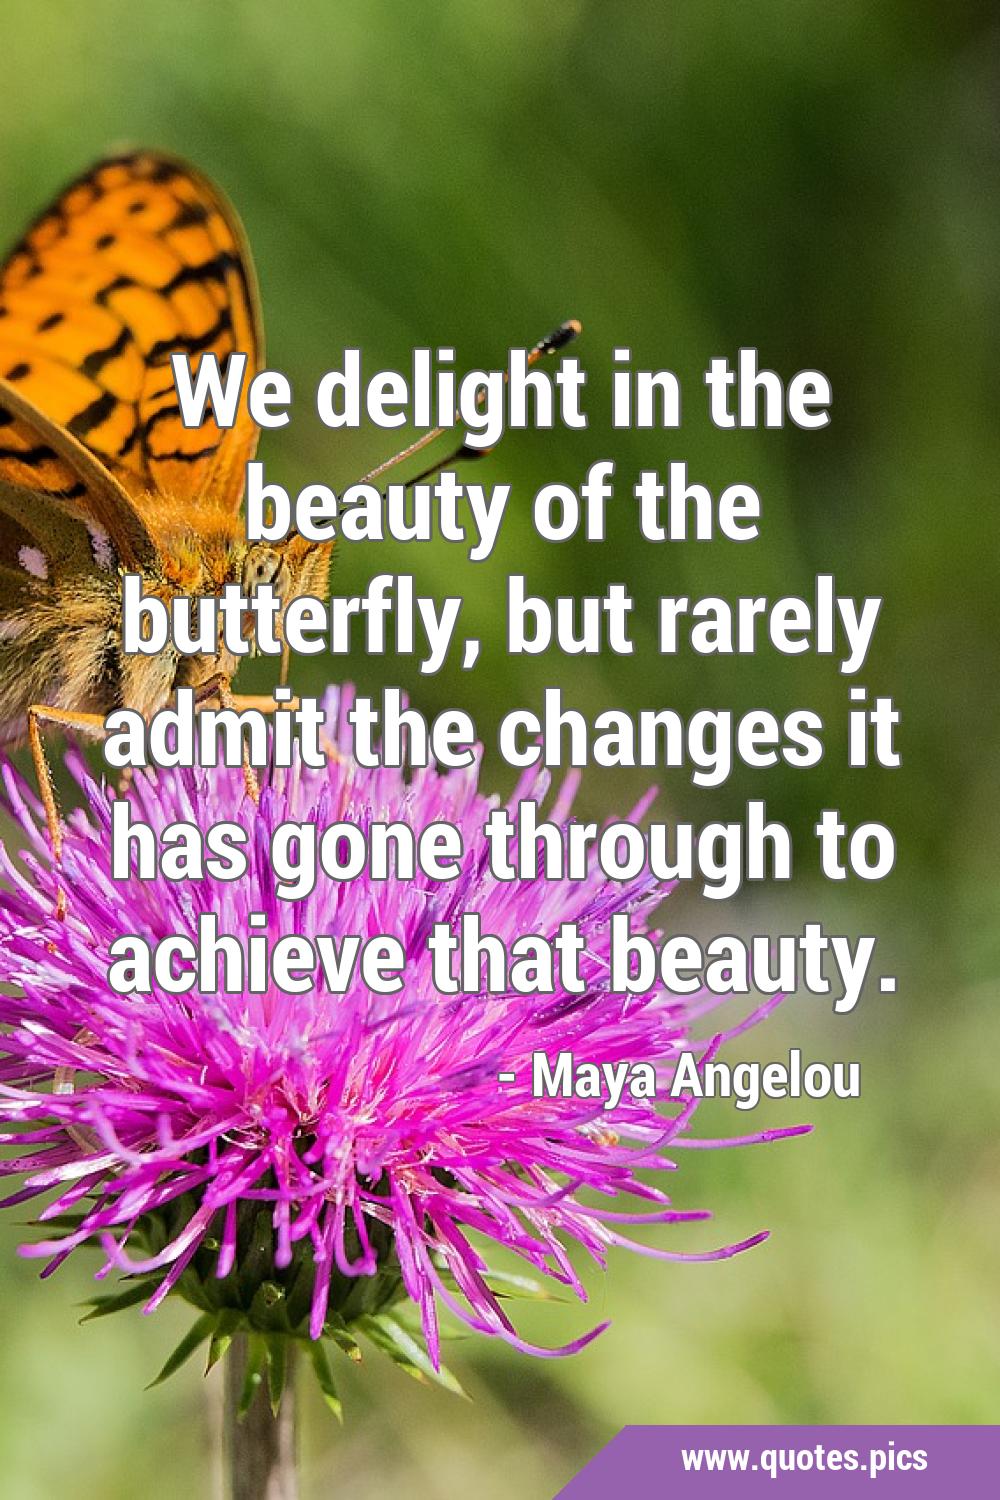 We delight in the beauty of the butterfly, but rarely admit the changes ...